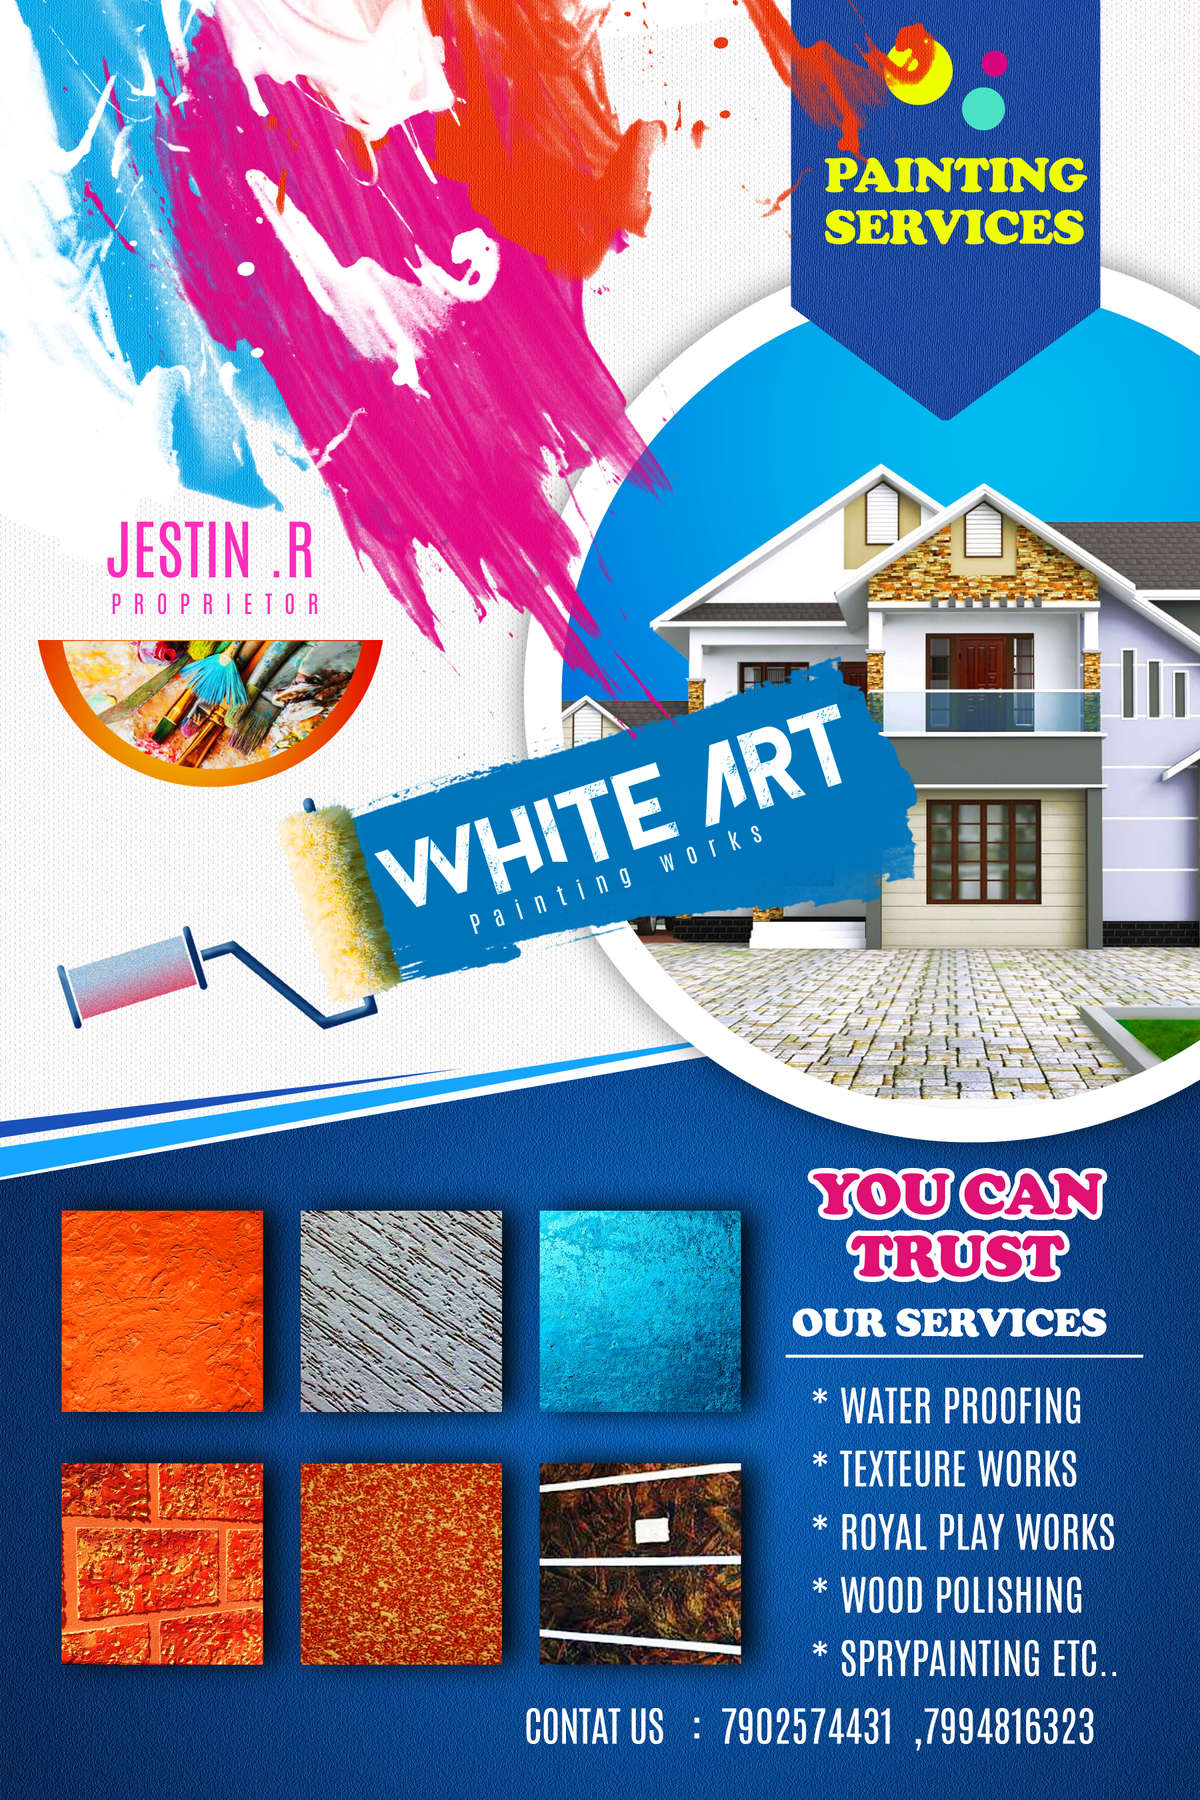 Painting work തരാമോ contact no 79.02.57.44.31